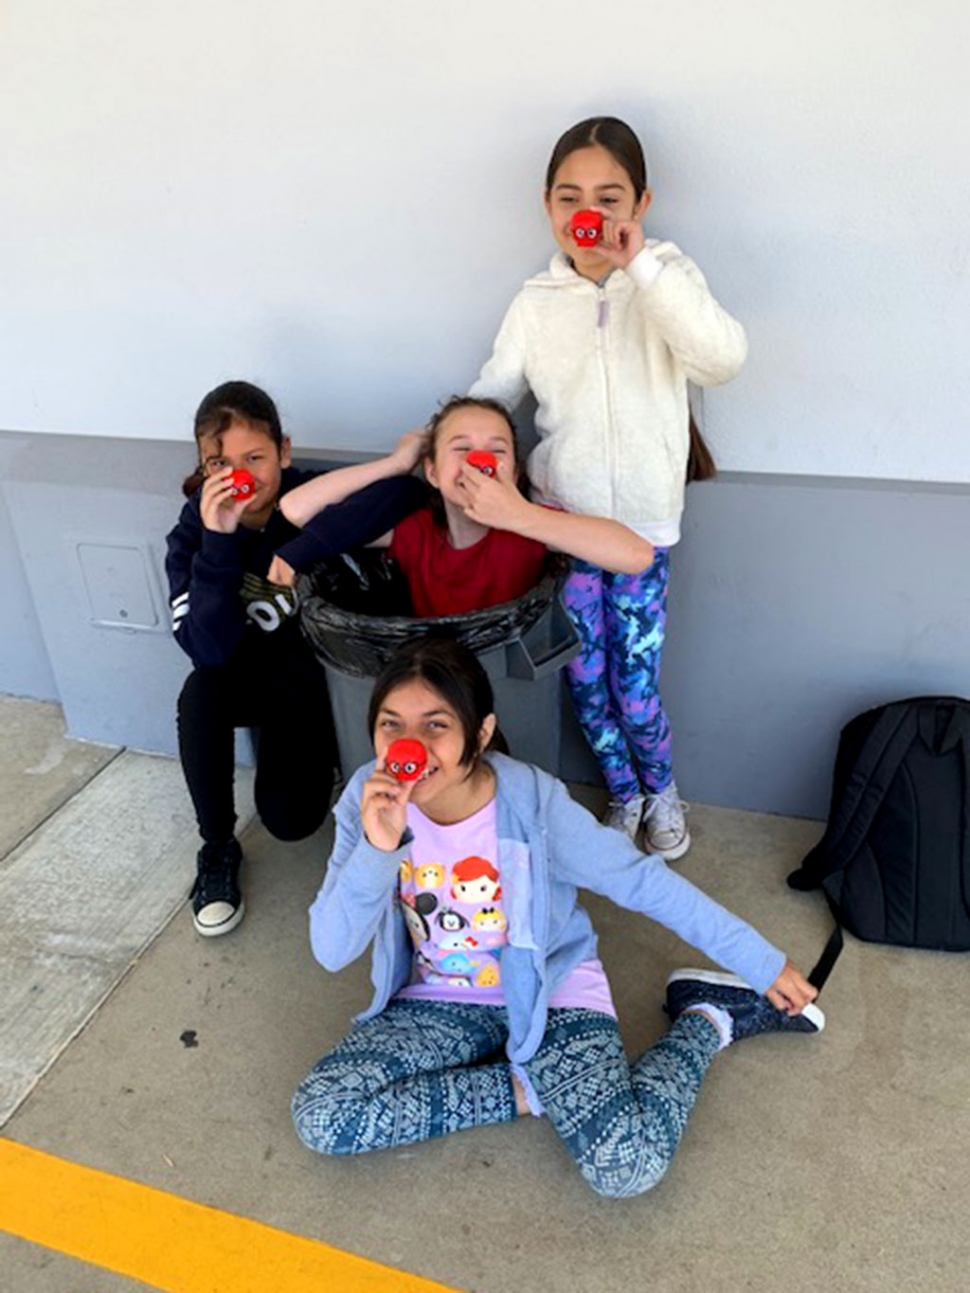 Mr. Craig’s students at San Cayetano celebrated Red Nose Day. This day is one of many service projects at San Cayetano School whereby students learn about the plight of children who live in extreme poverty in the United States and around
the world. Photos Courtesy Jon Craig, 4th-5th Grade Teacher, San Cayetano Elementary School.